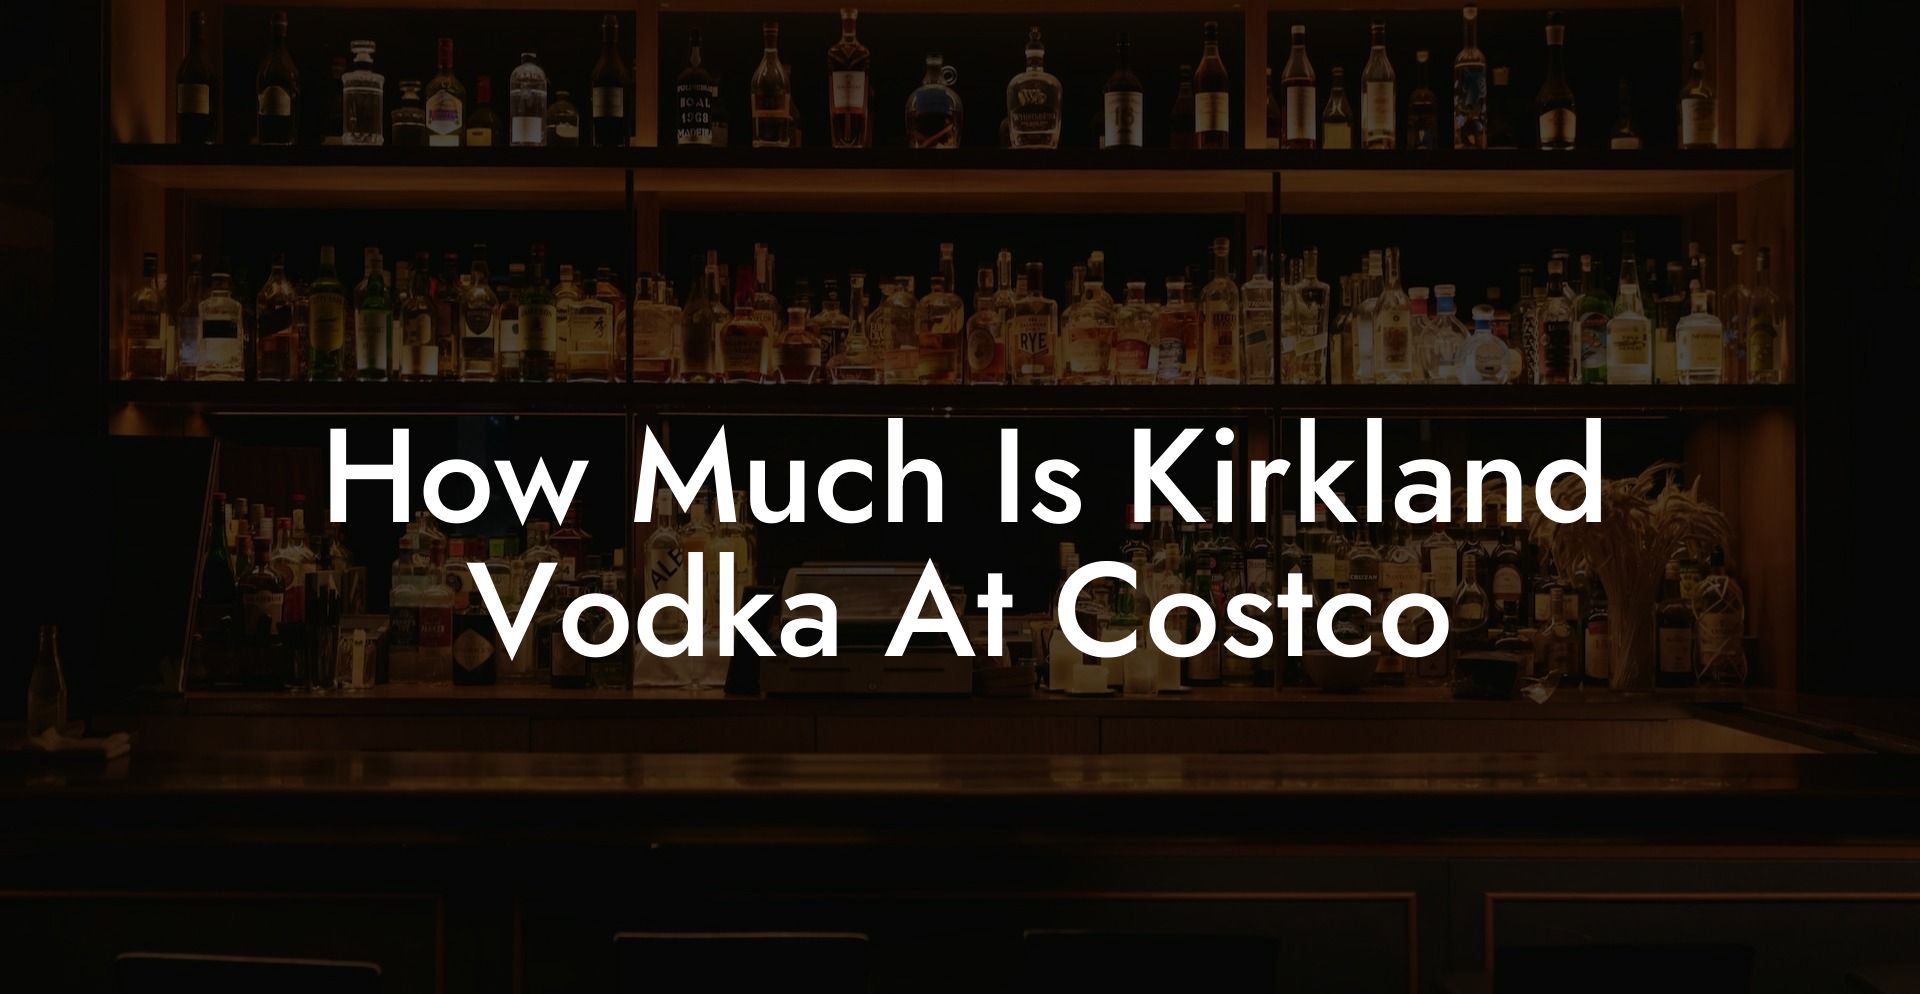 How Much Is Kirkland Vodka At Costco